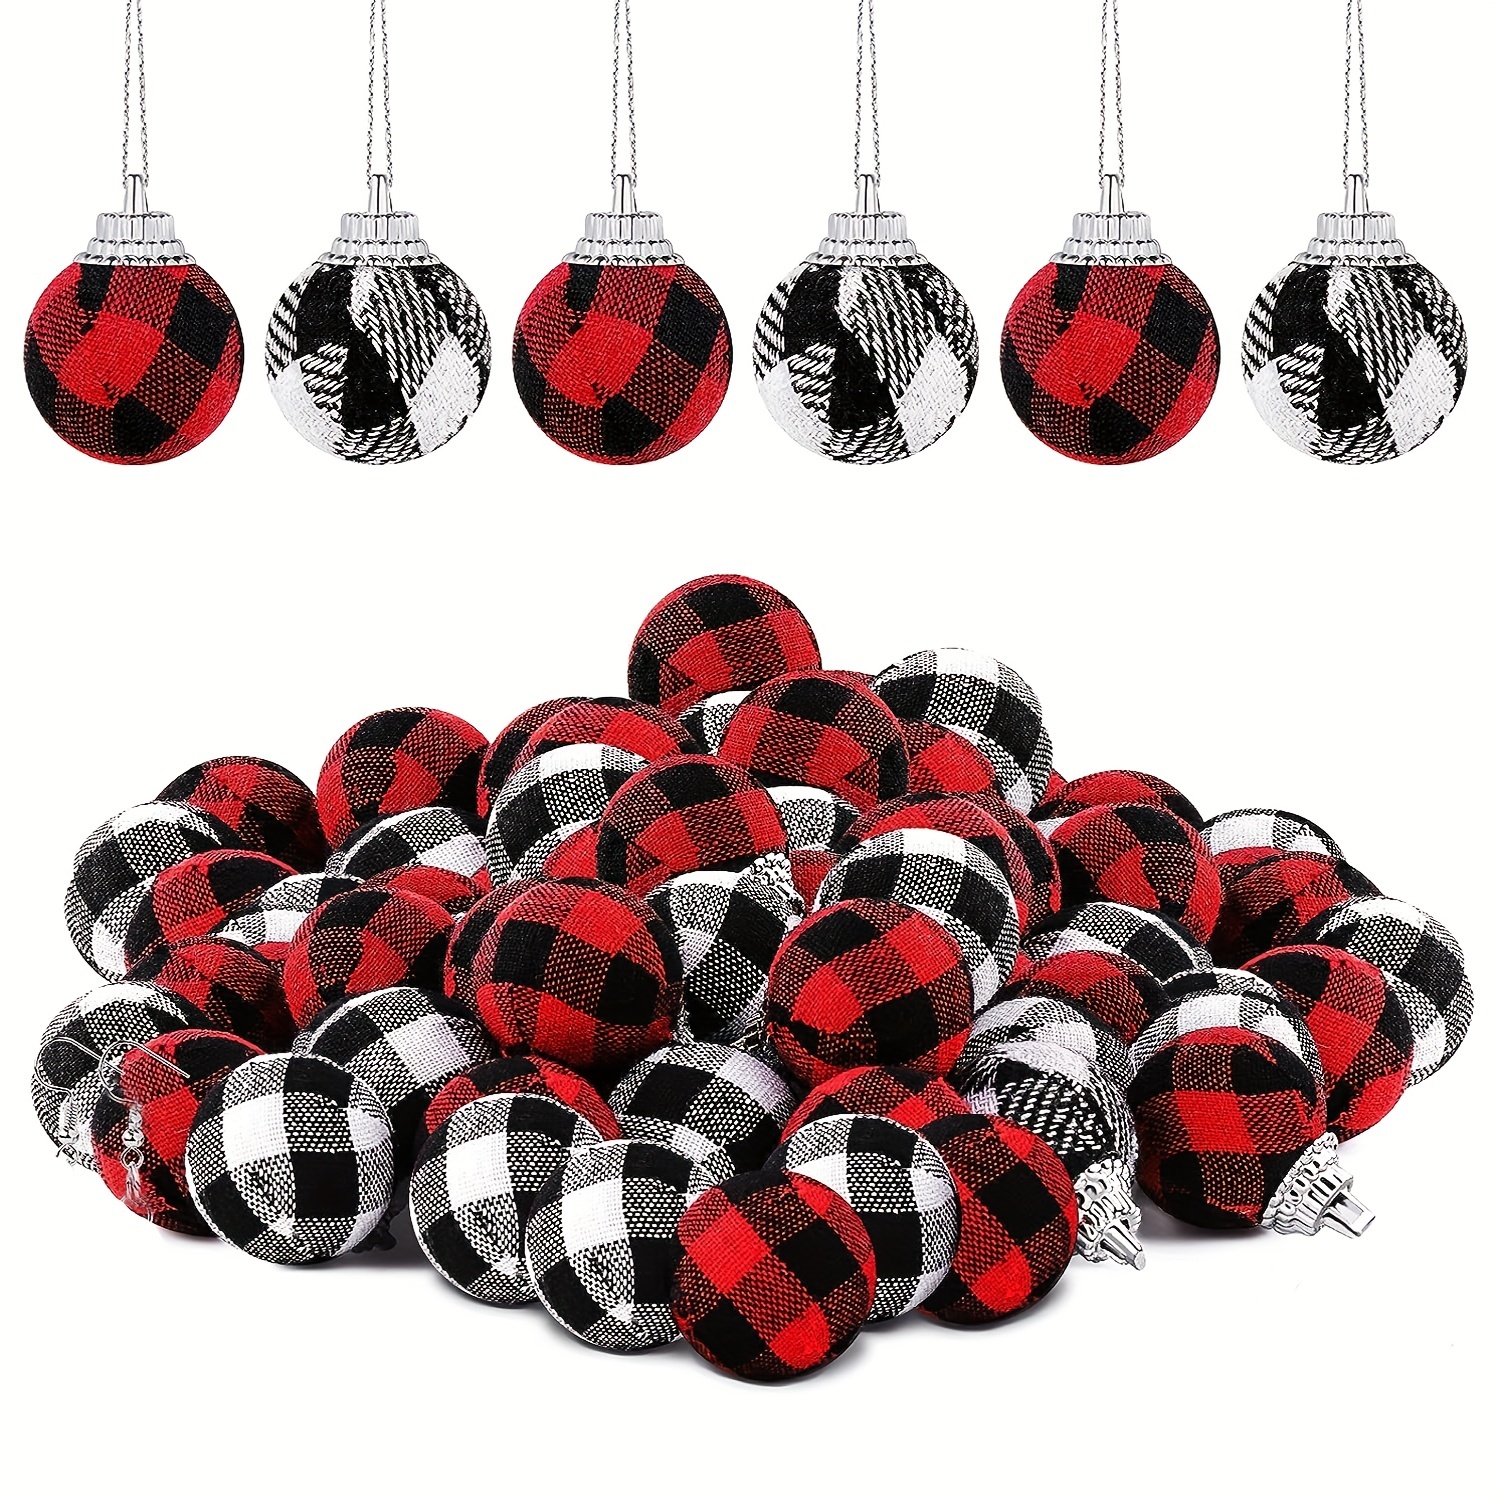 Ornativity Black and White Ornaments - Glittered Checkered Ball Ornament with Red Bow Christmas Tree Decoration Set (Pack of 12)